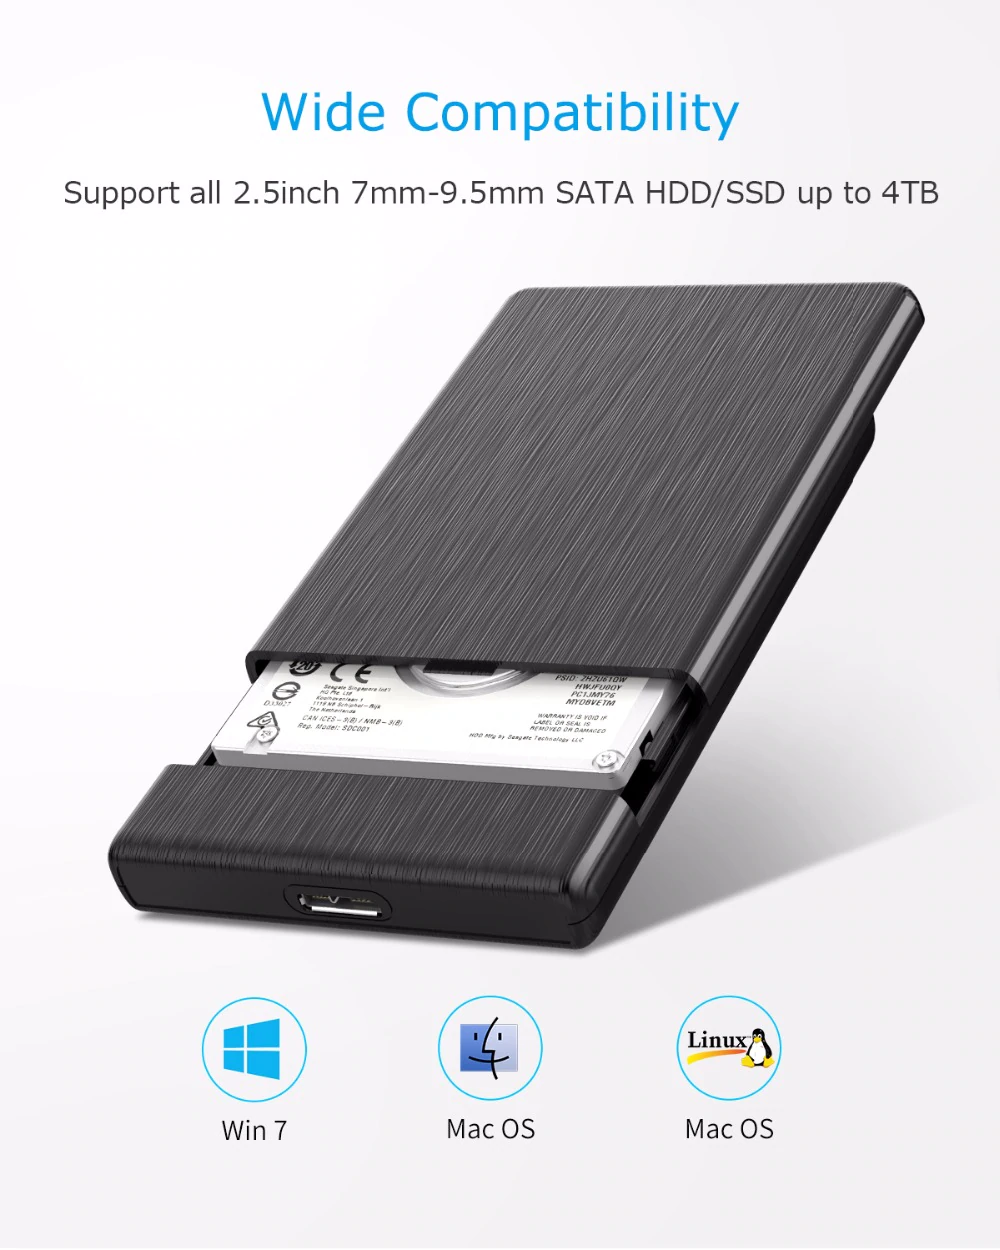 External 2.5-inch SATA to USB 3.0 hard drive enclosure from ORICO for SSD and HDD, UASP support